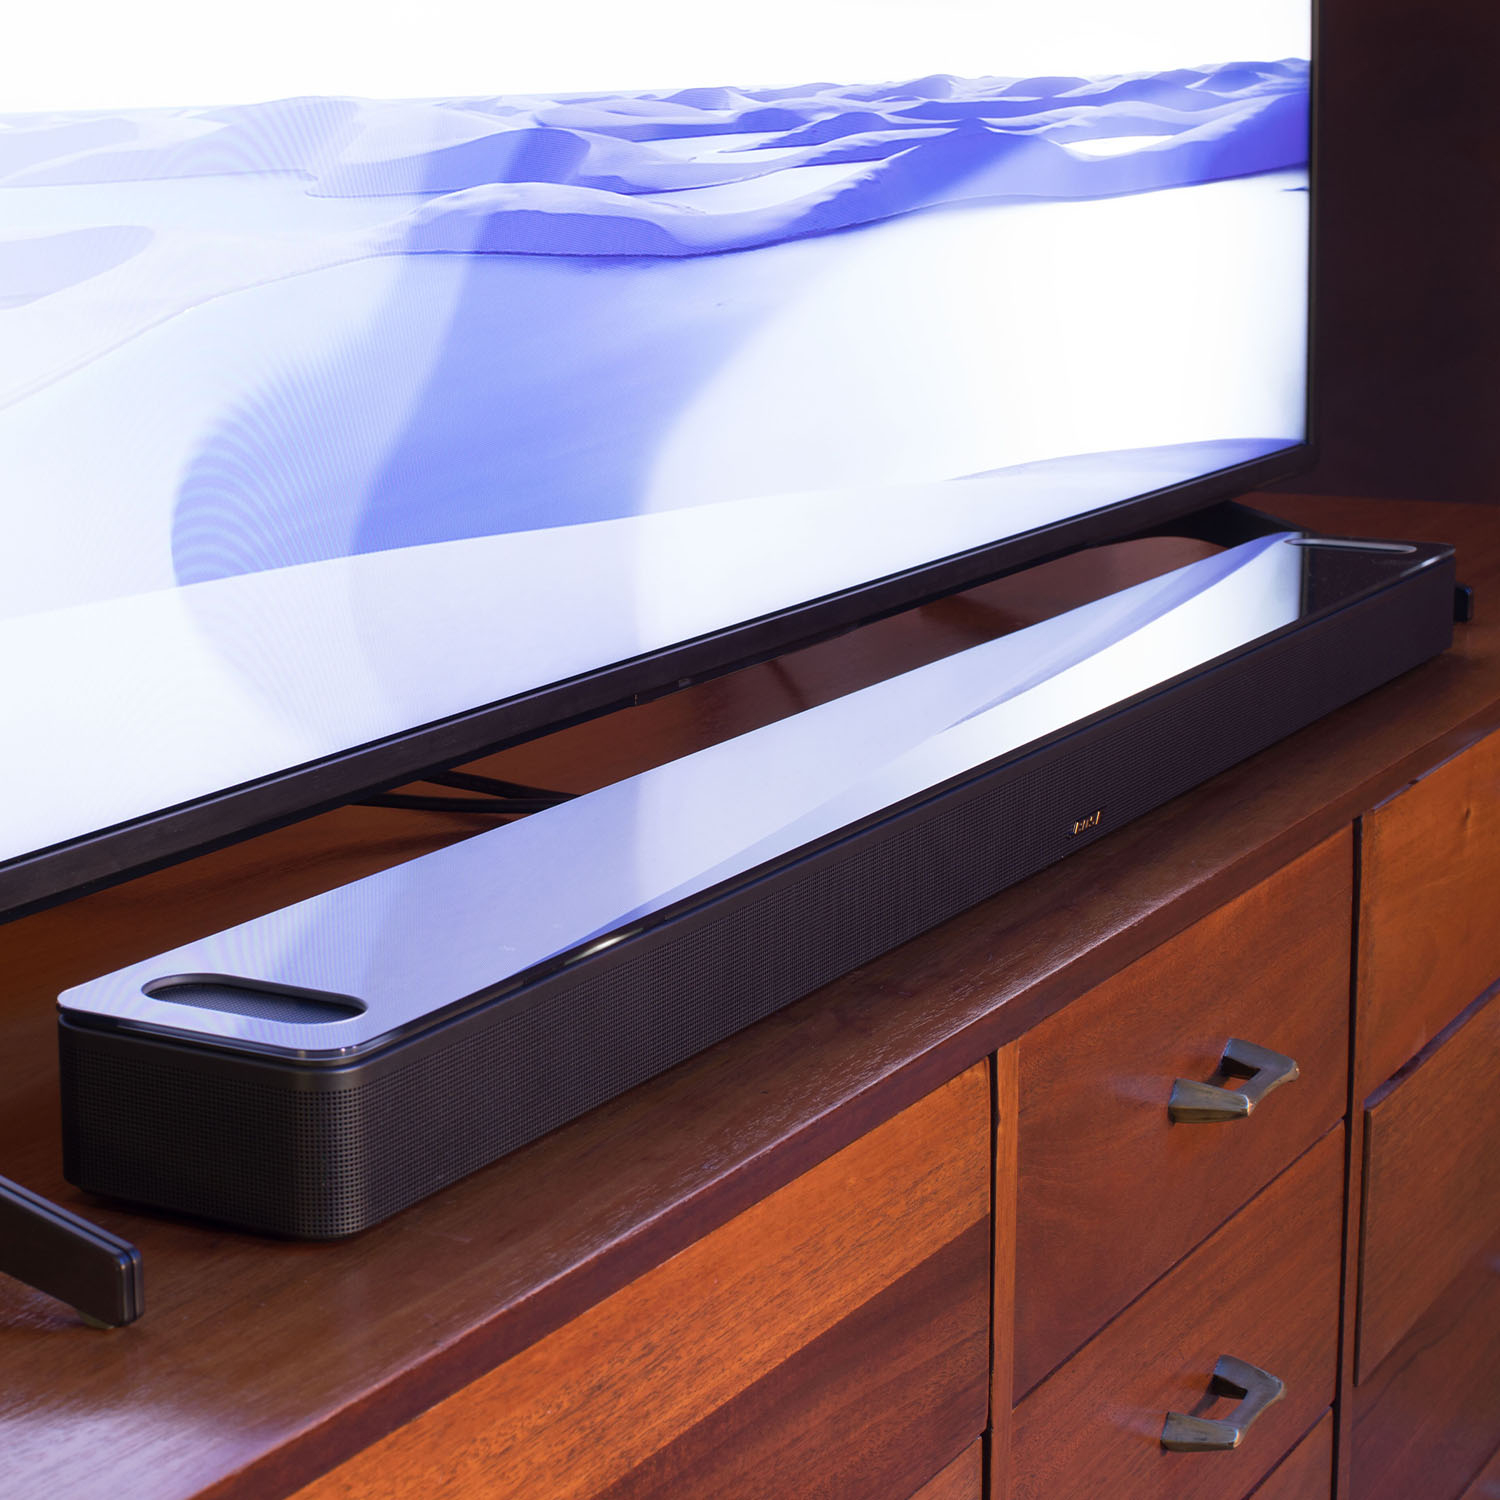 Bose Smart Soundbar 900 With Dolby Atmos and Voice Assistant Black  863350-1100 - Best Buy